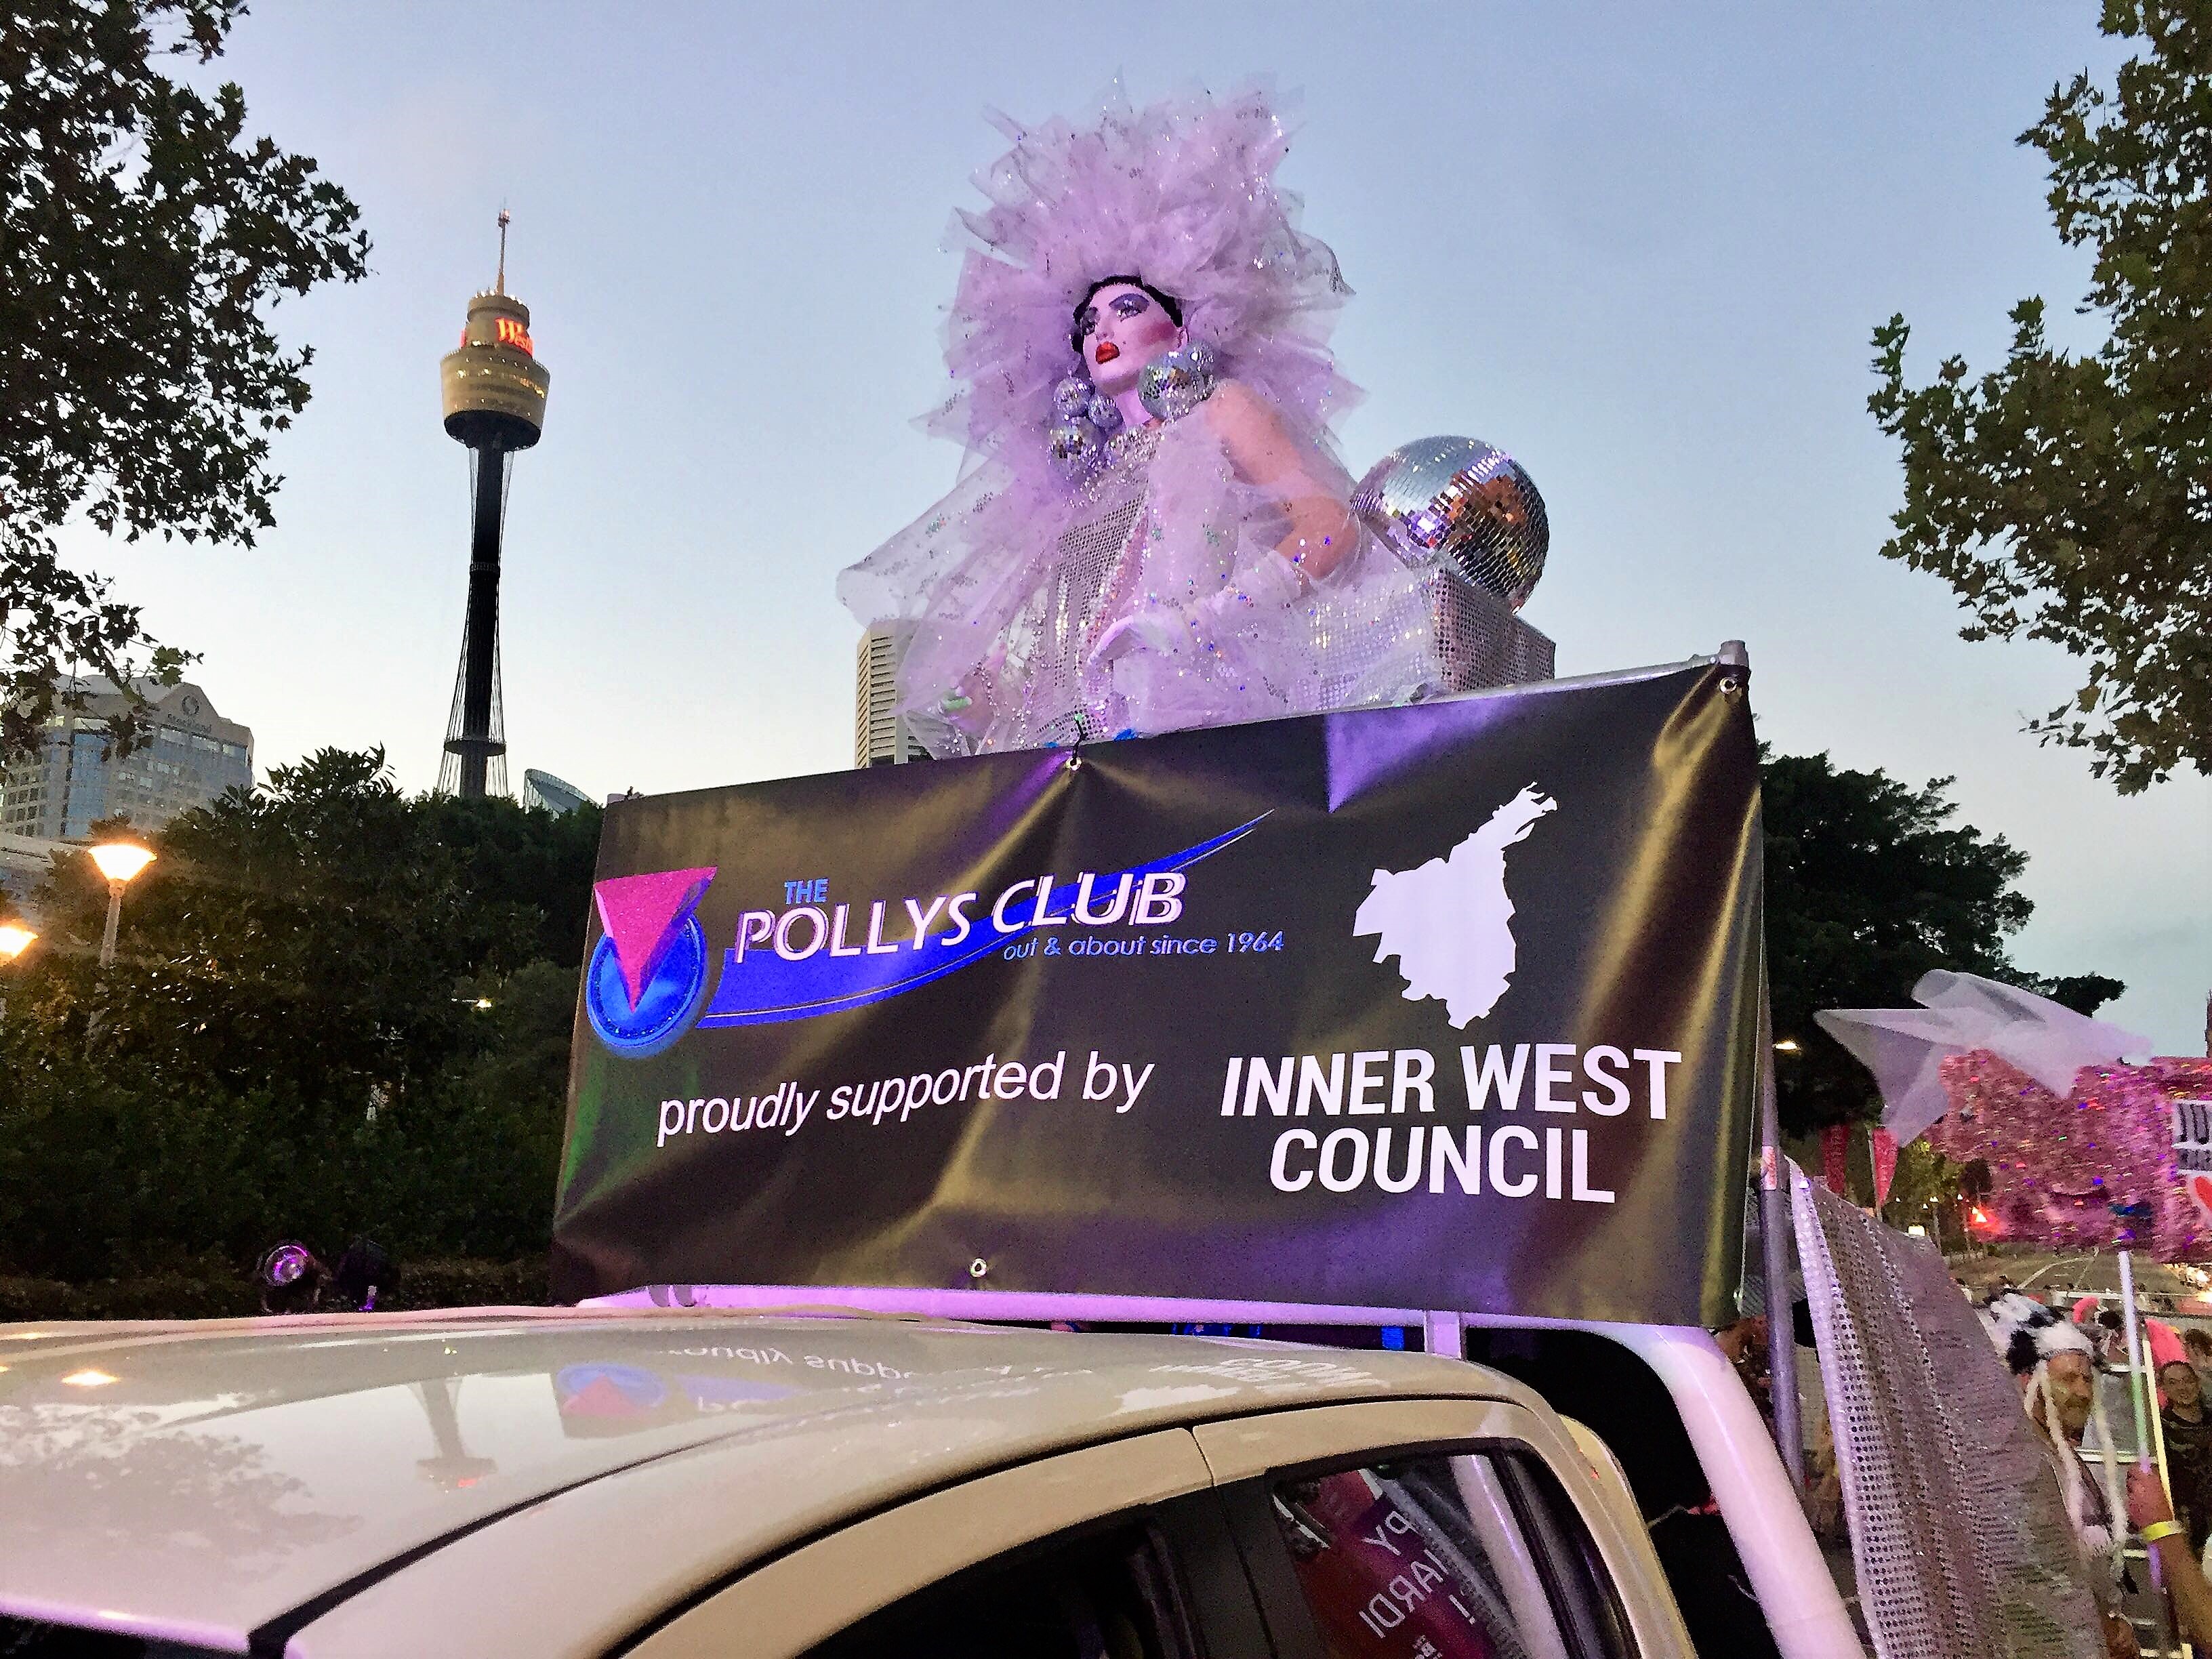 Polly Esther, The Pollys Club mascot, stands tall on the Pollys float. Image: Craige Juratowitch